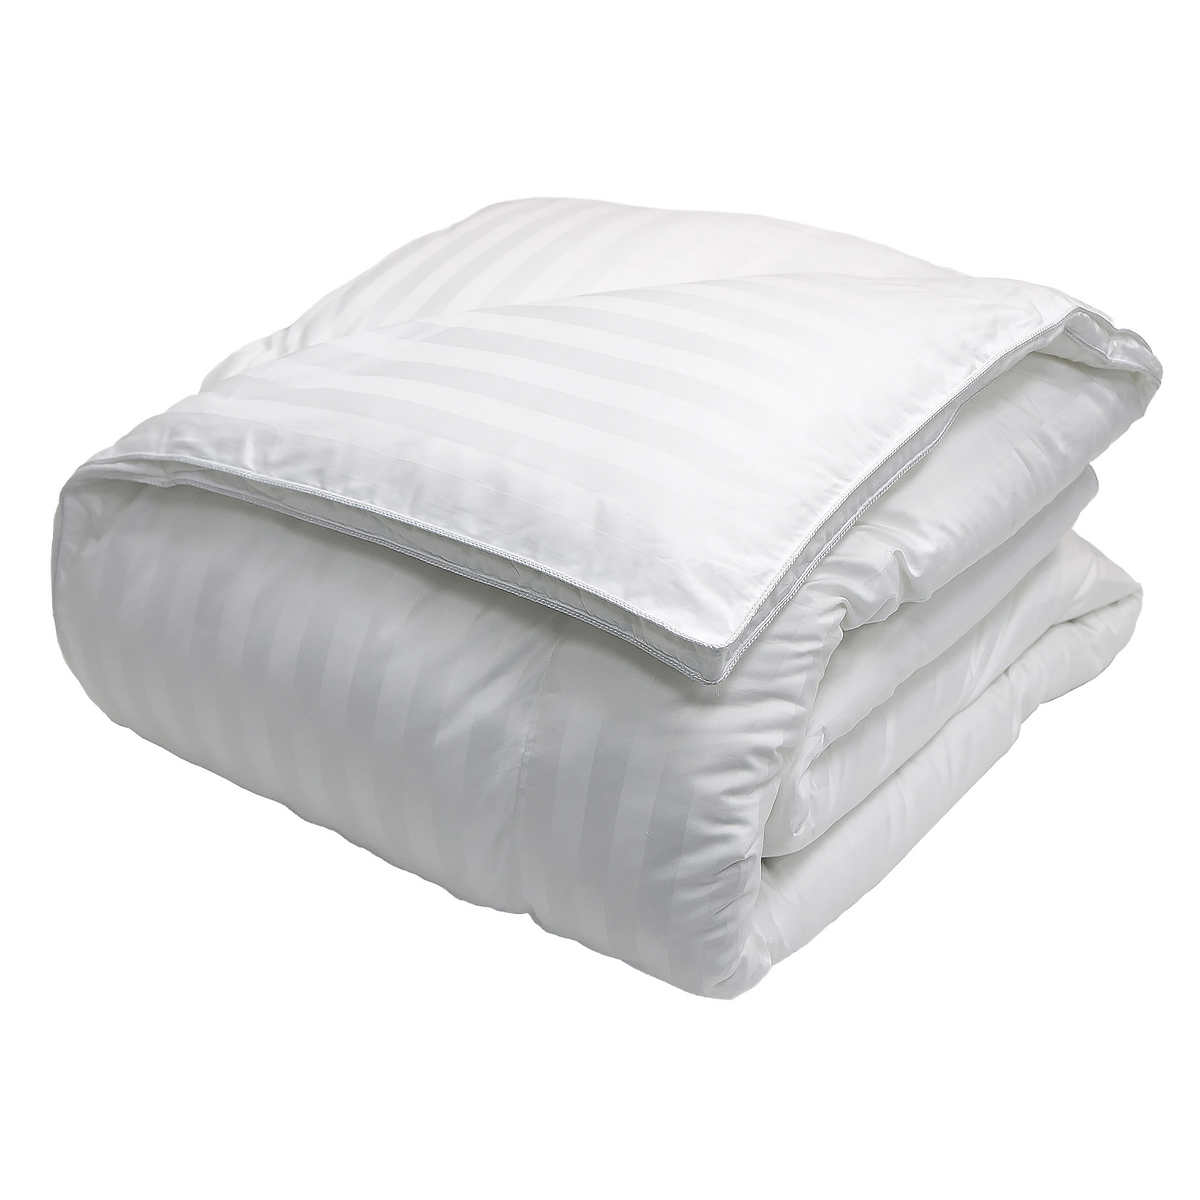 Details about   Glorious Down Alternative Comforter 100/200/300 GSM Black Striped US Twin Size 